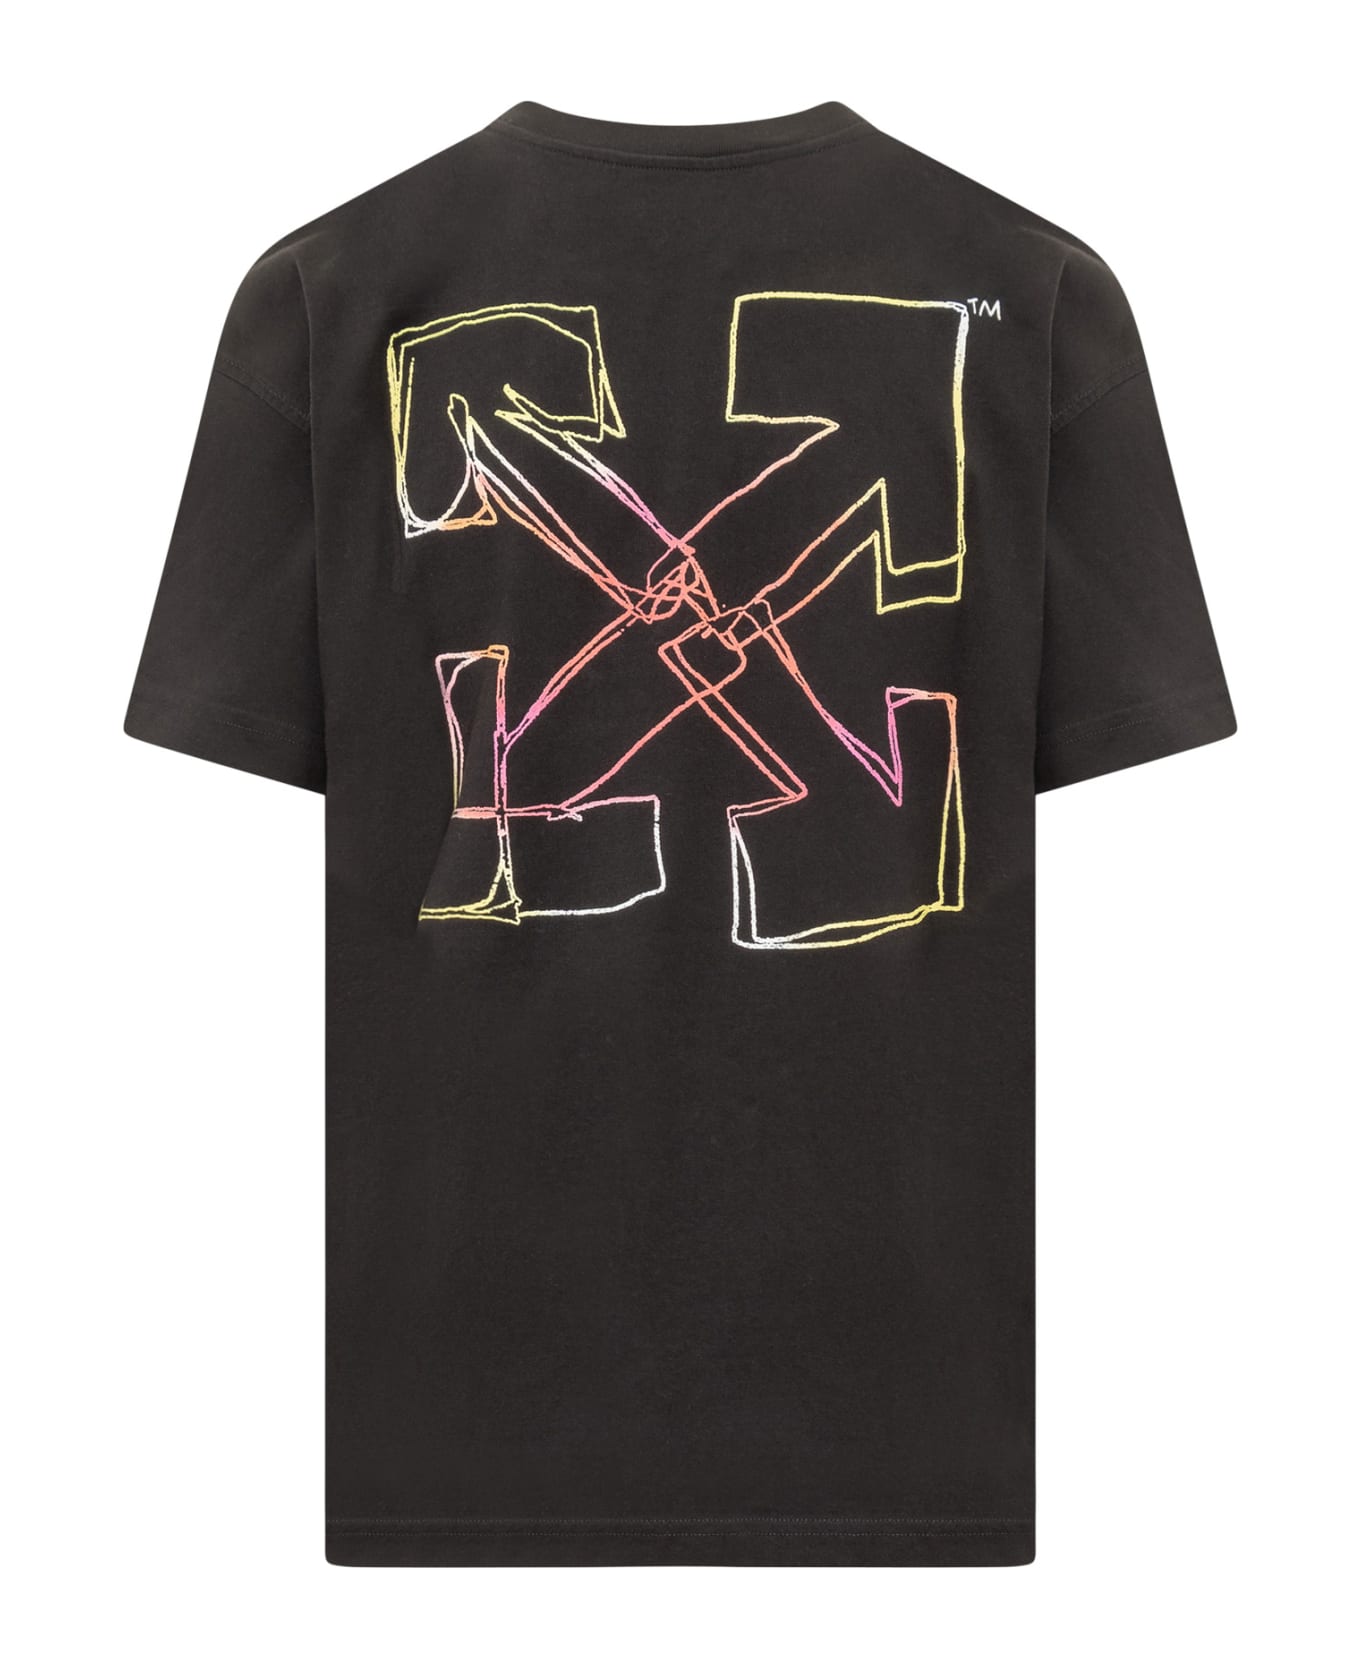 Off-White Black T-shirt With Design And Arrow Motif - Black